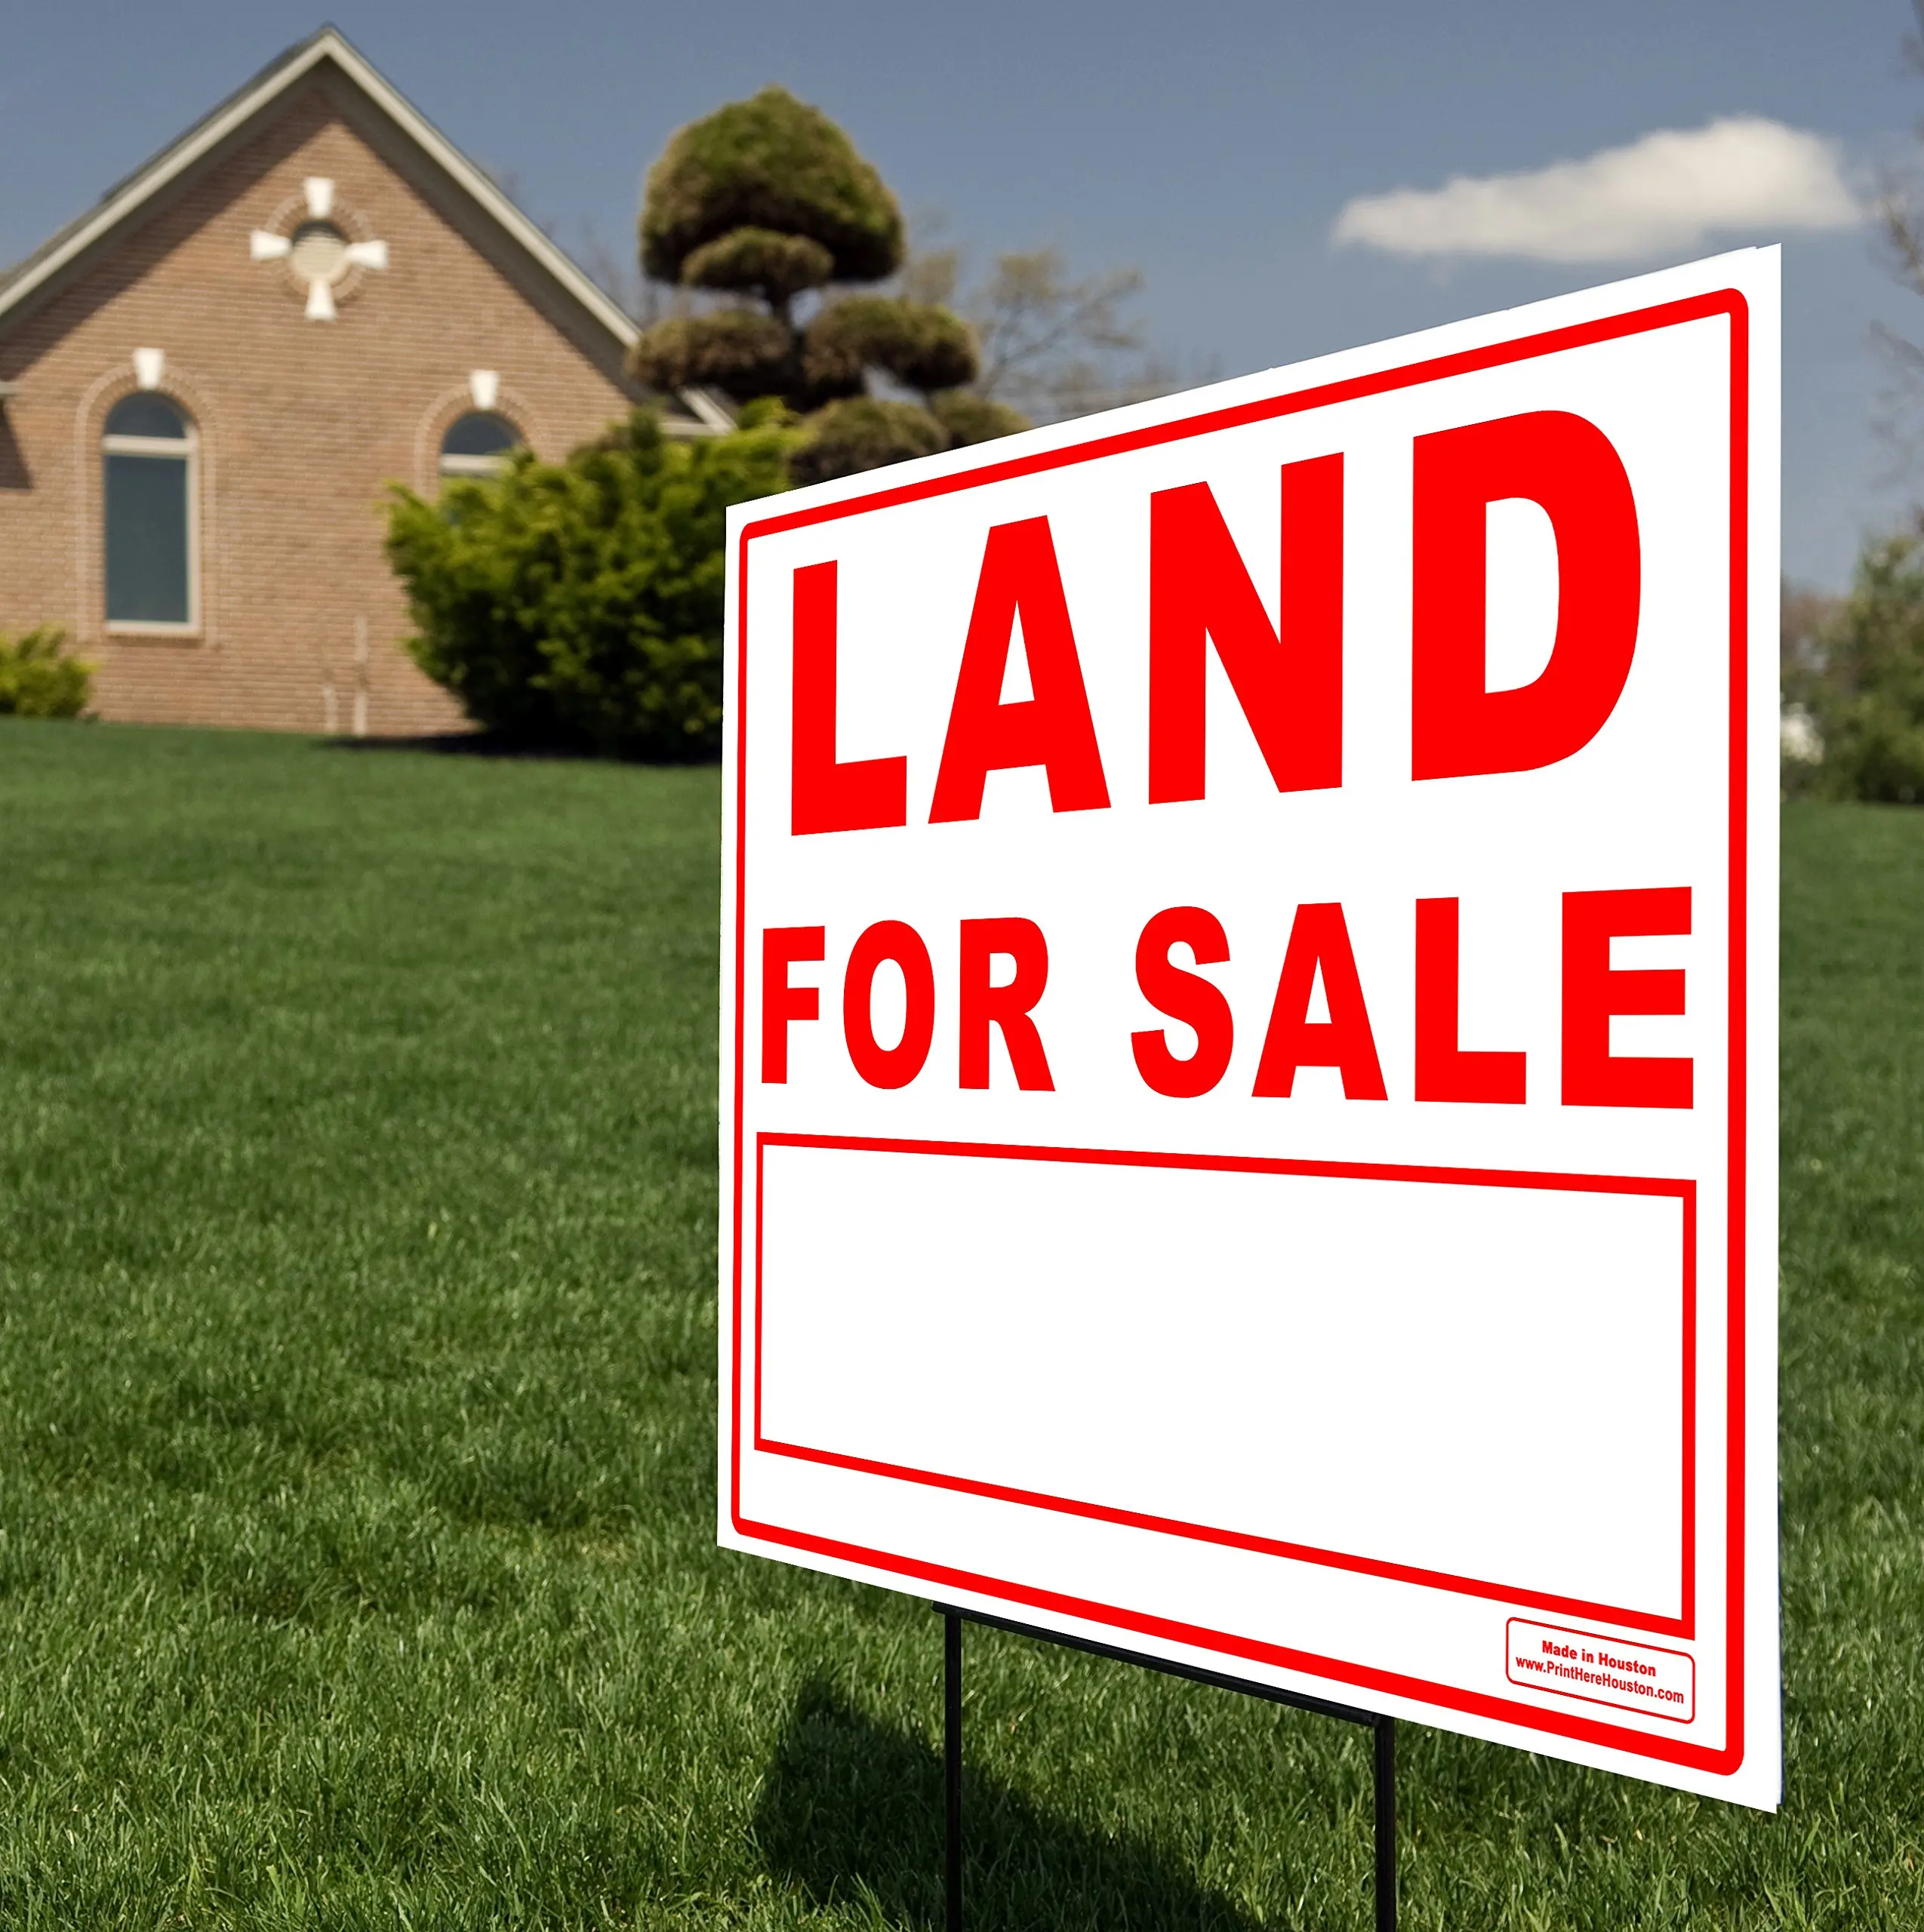 Choosing Land For Sale In Australia | New Homes, Condos \u0026 Project launches for Sale in Singapore